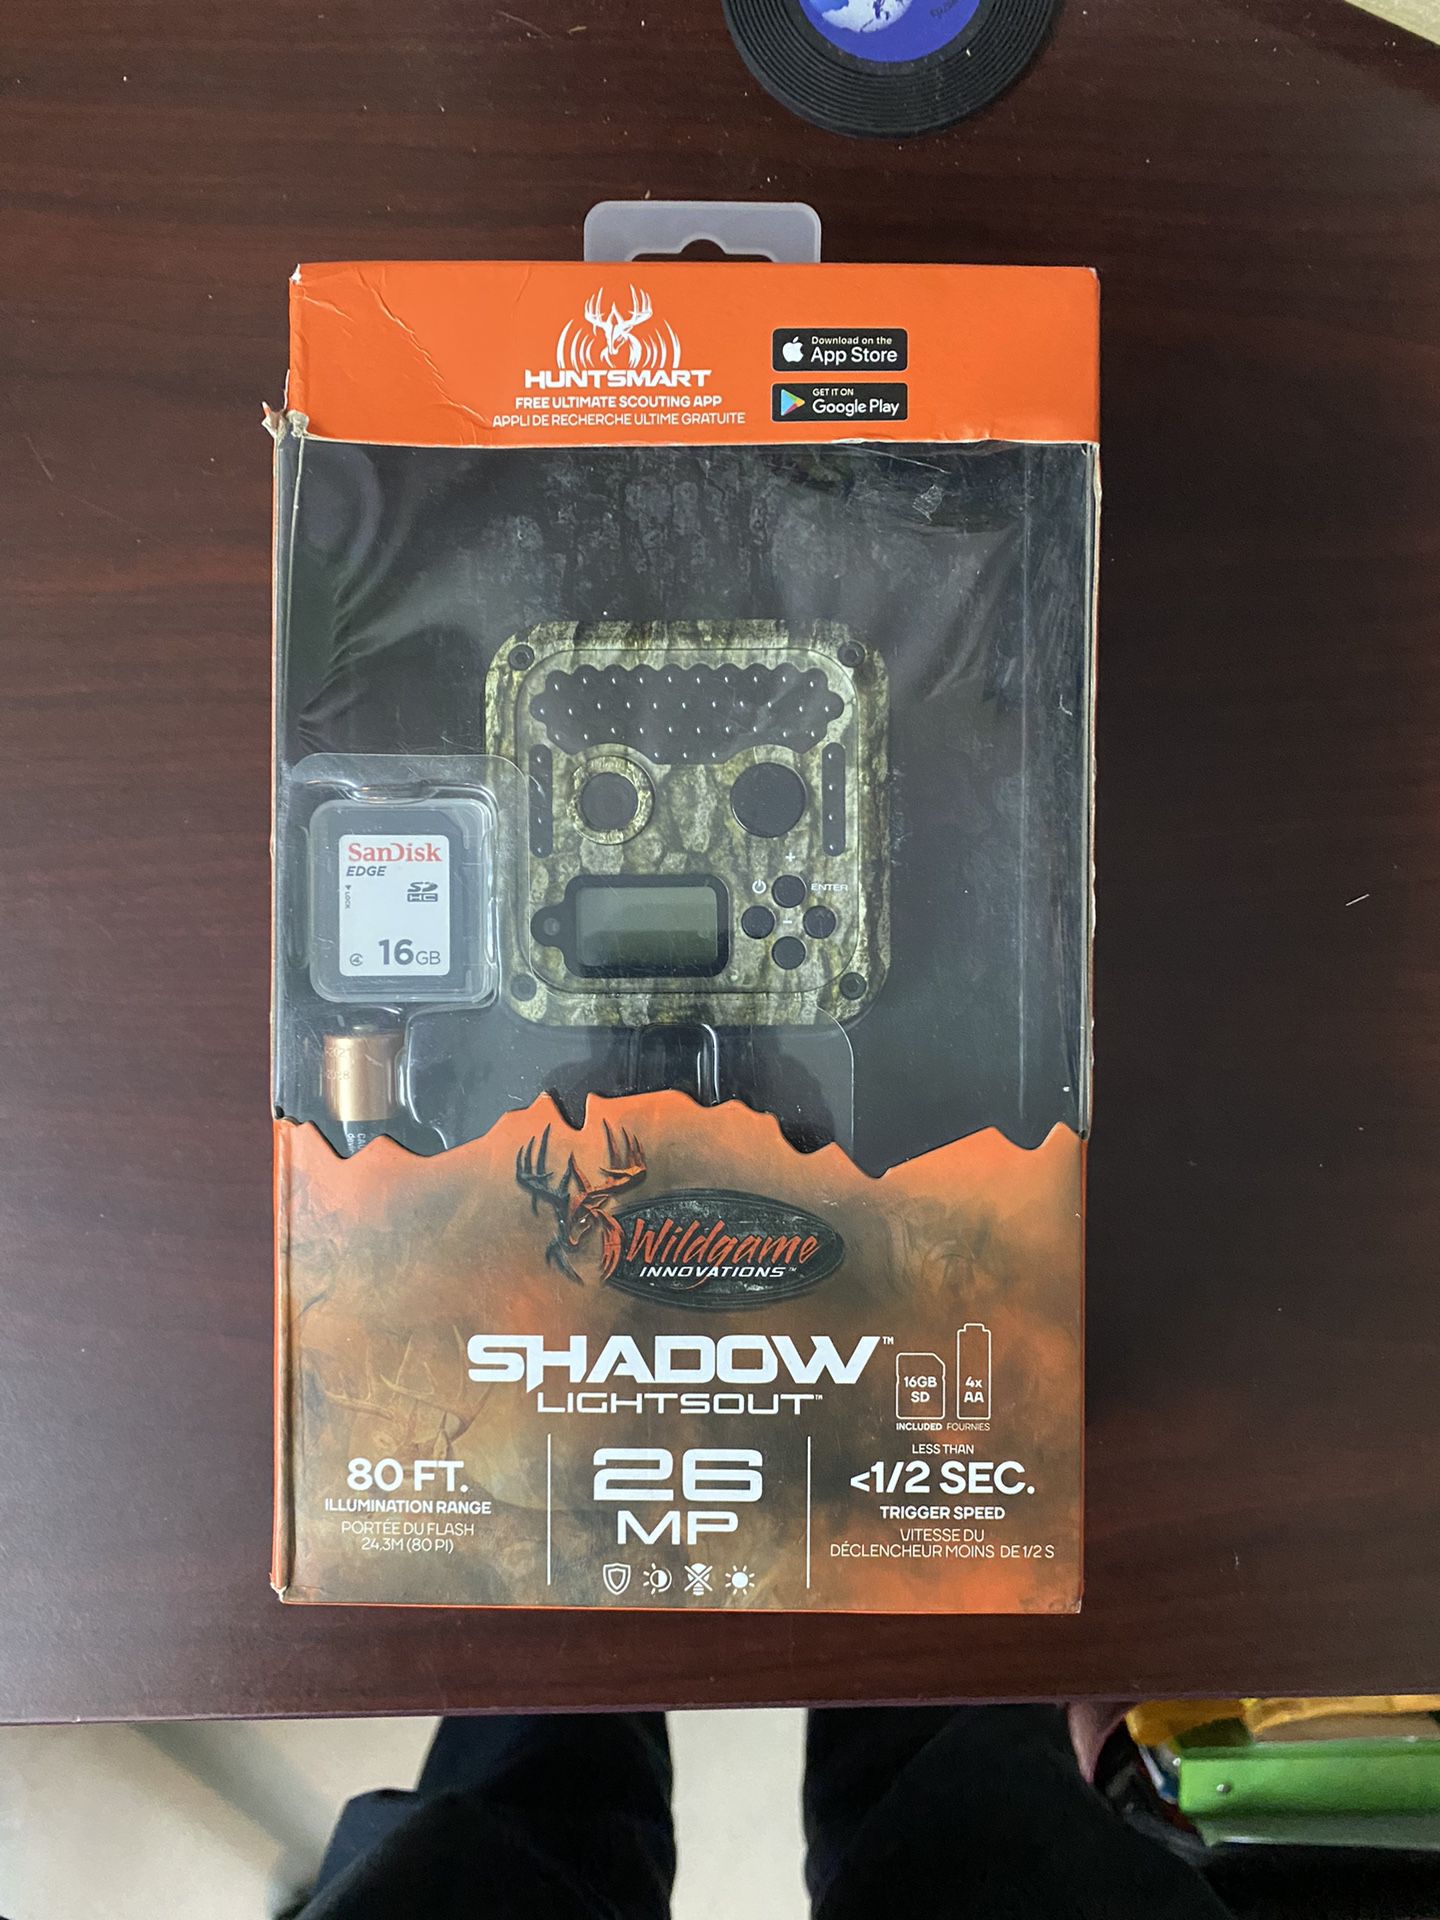 Wildgame innovations Shadow Lightsout 26MP Trail Camera